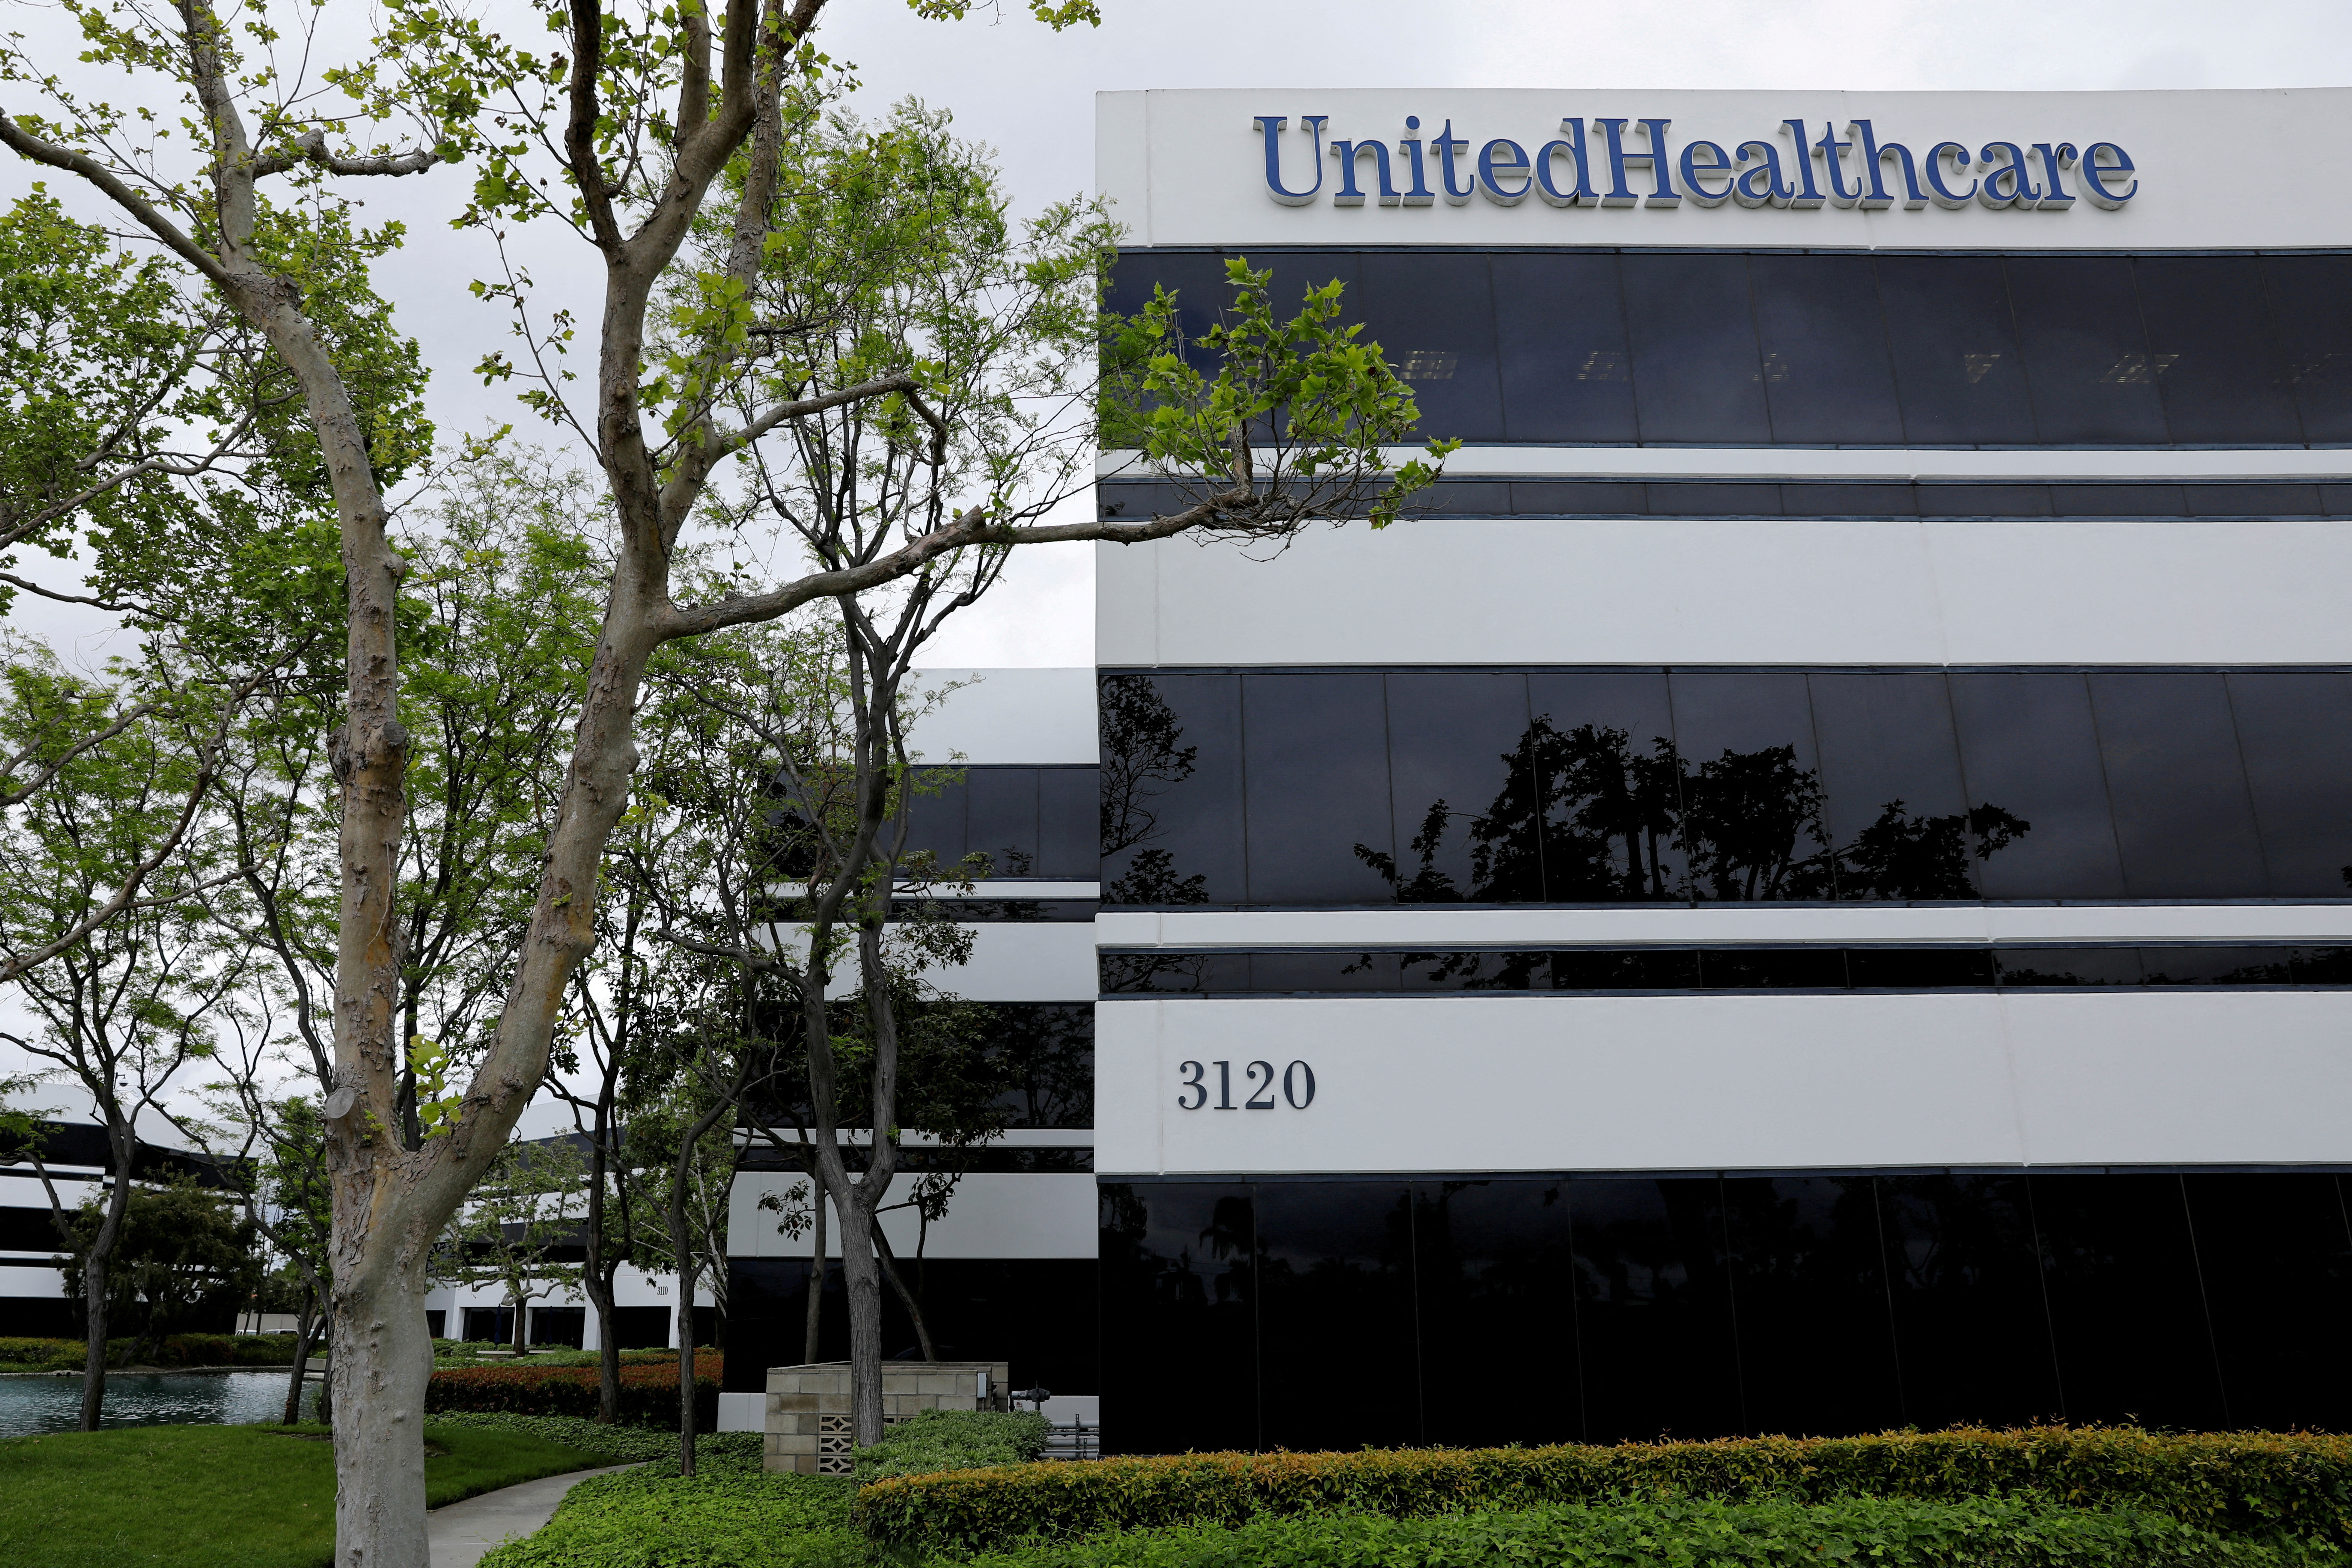 The corporate logo of the UnitedHealth Group appears on the side of one of their office buildings in Santa Ana, California